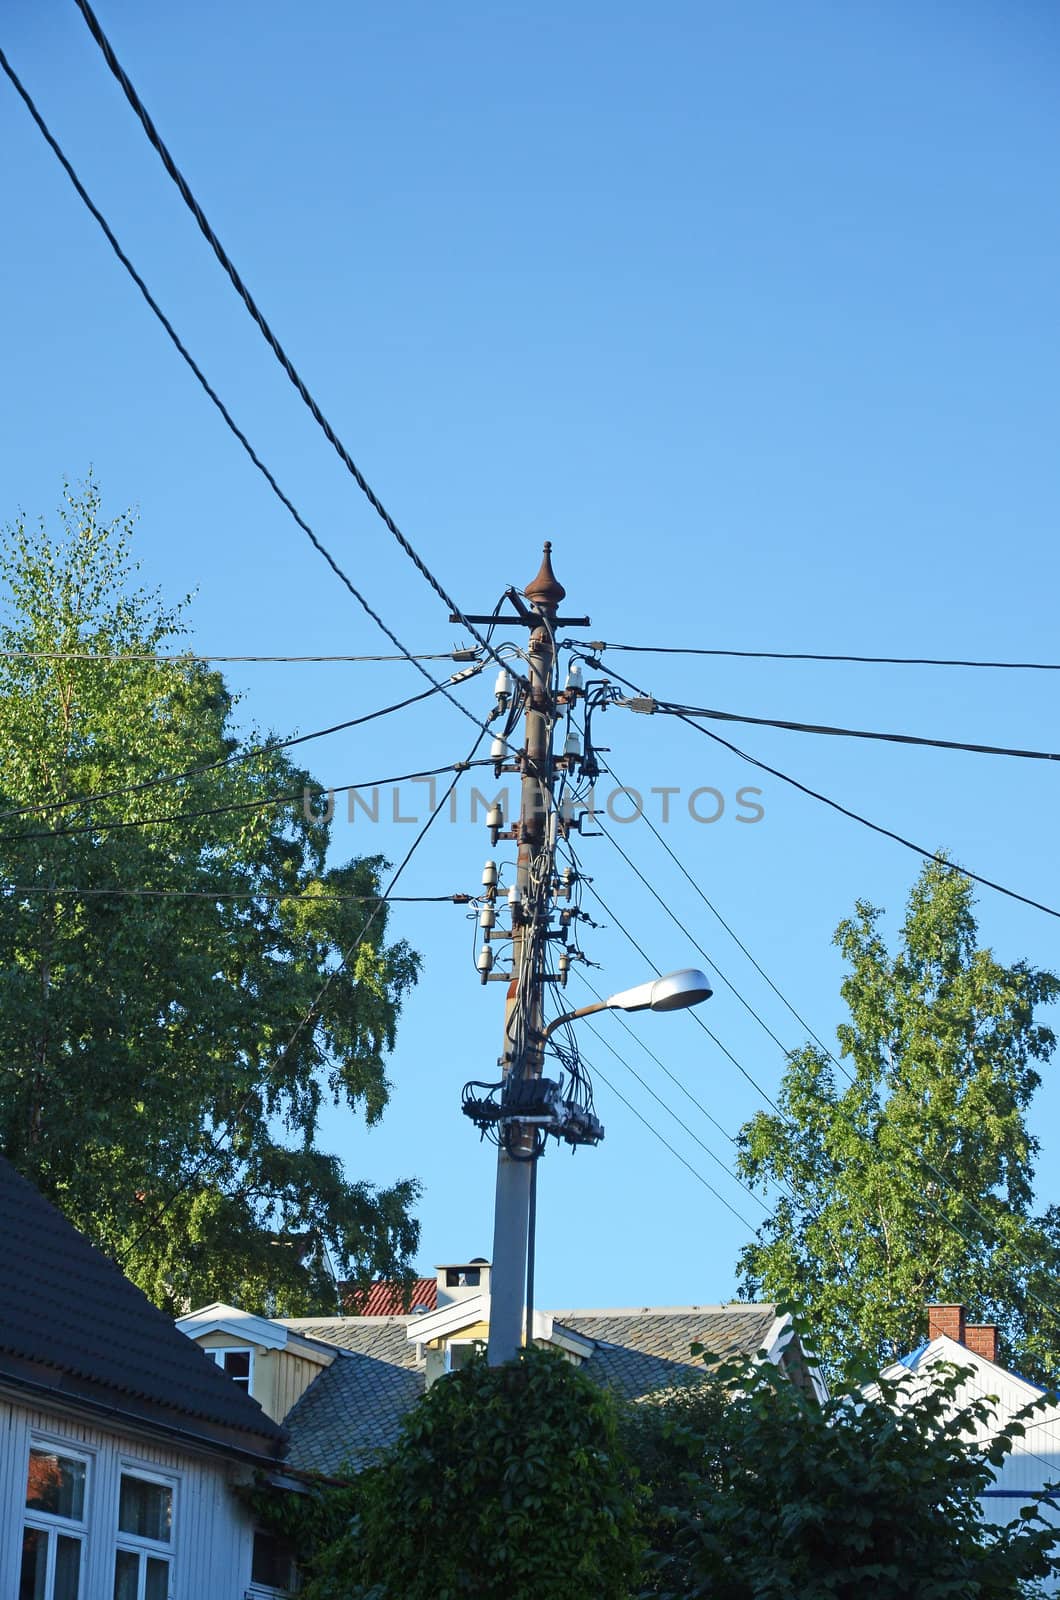 Telephone and electricity wires on a post in an urban environment